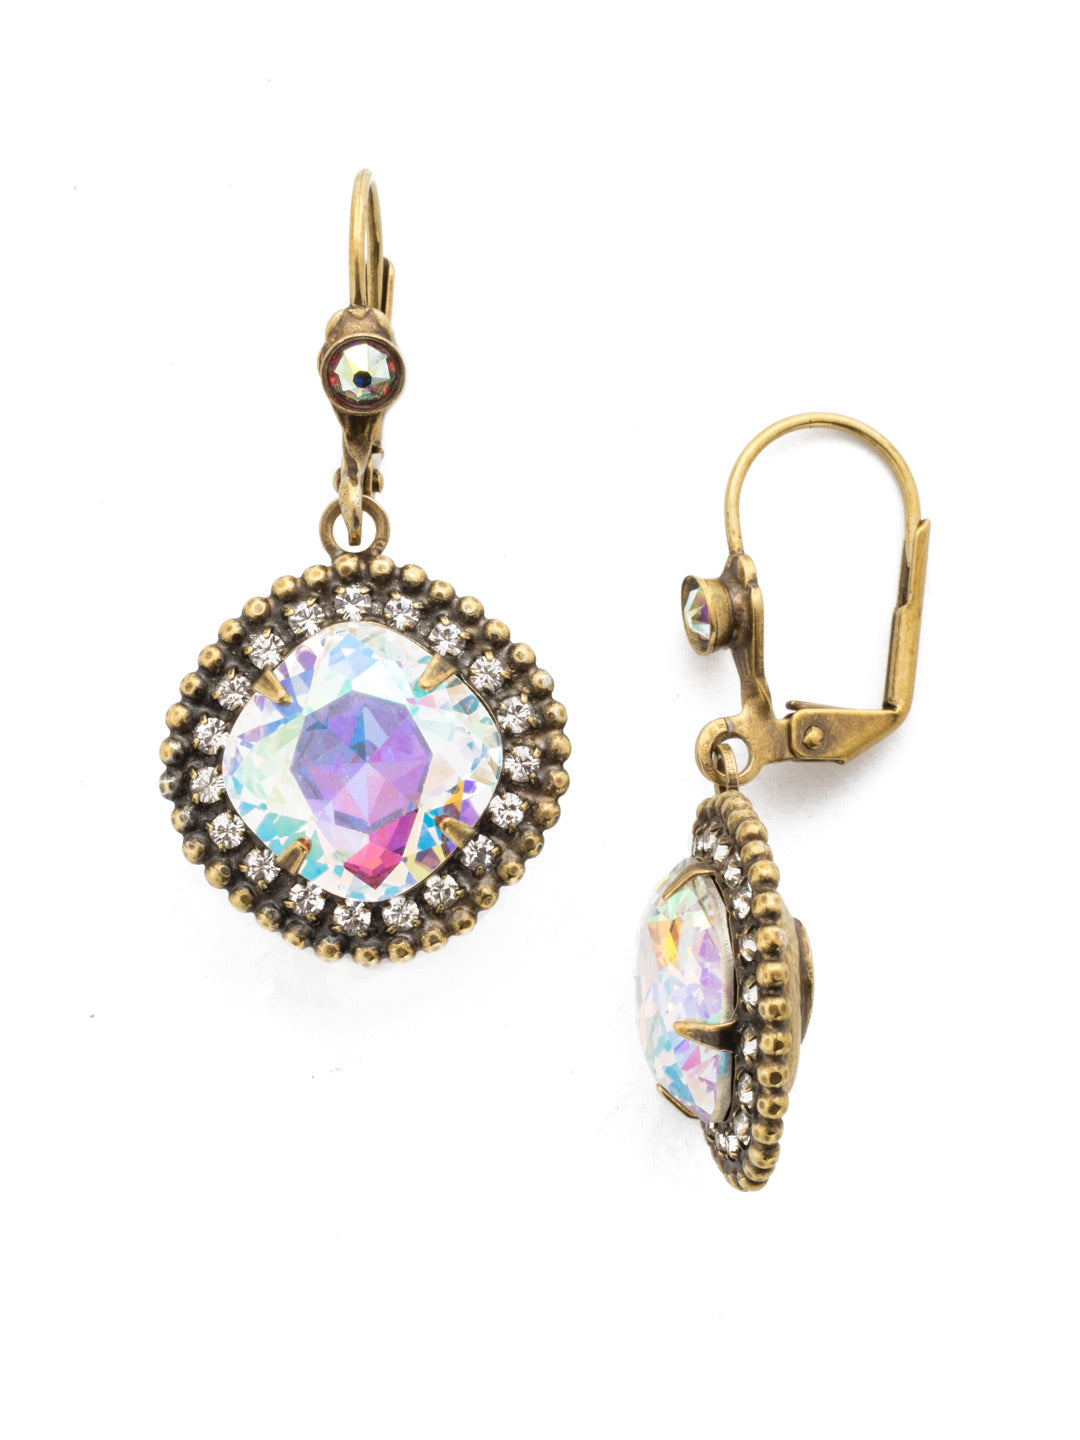 Cushion Cut Drop Dangle Earrings - ECB20AGSNF - <p>Behold graceful glamour at its finest. A cushion cut crystal surrounded by round gemstones hangs from a decorative hinge back clasp. From Sorrelli's Snowflake collection in our Antique Gold-tone finish.</p>